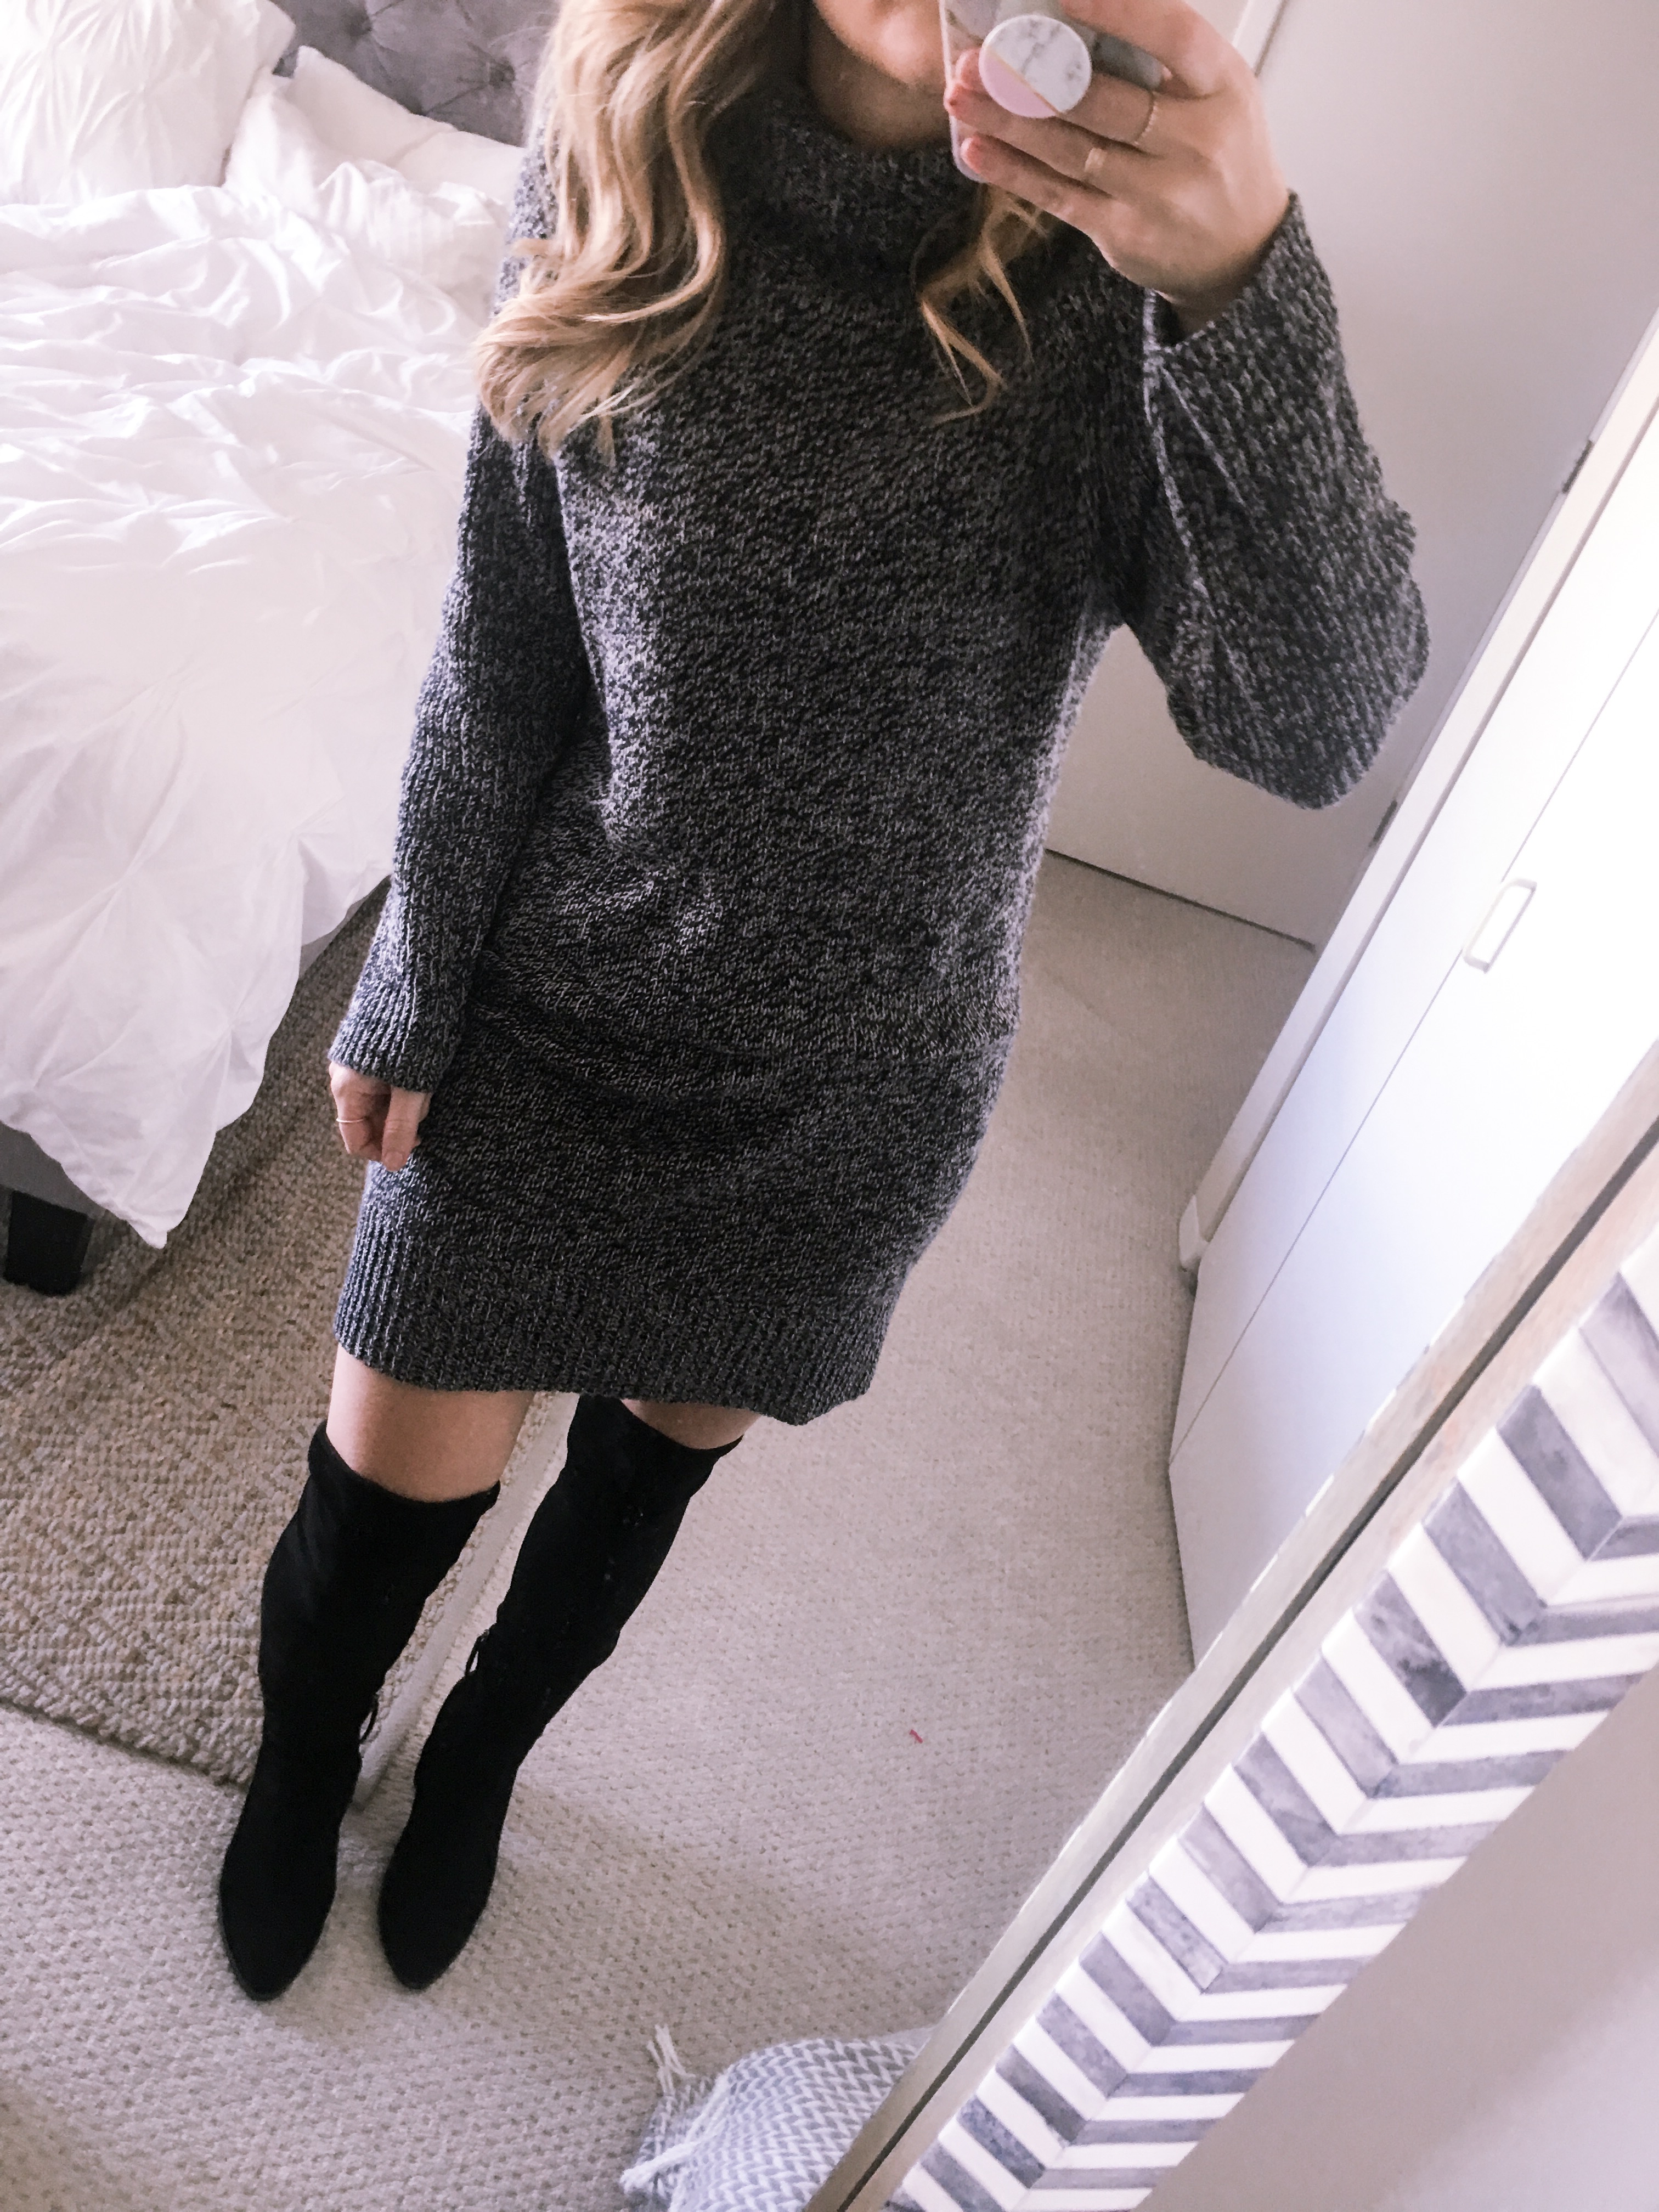 grey dress and boots